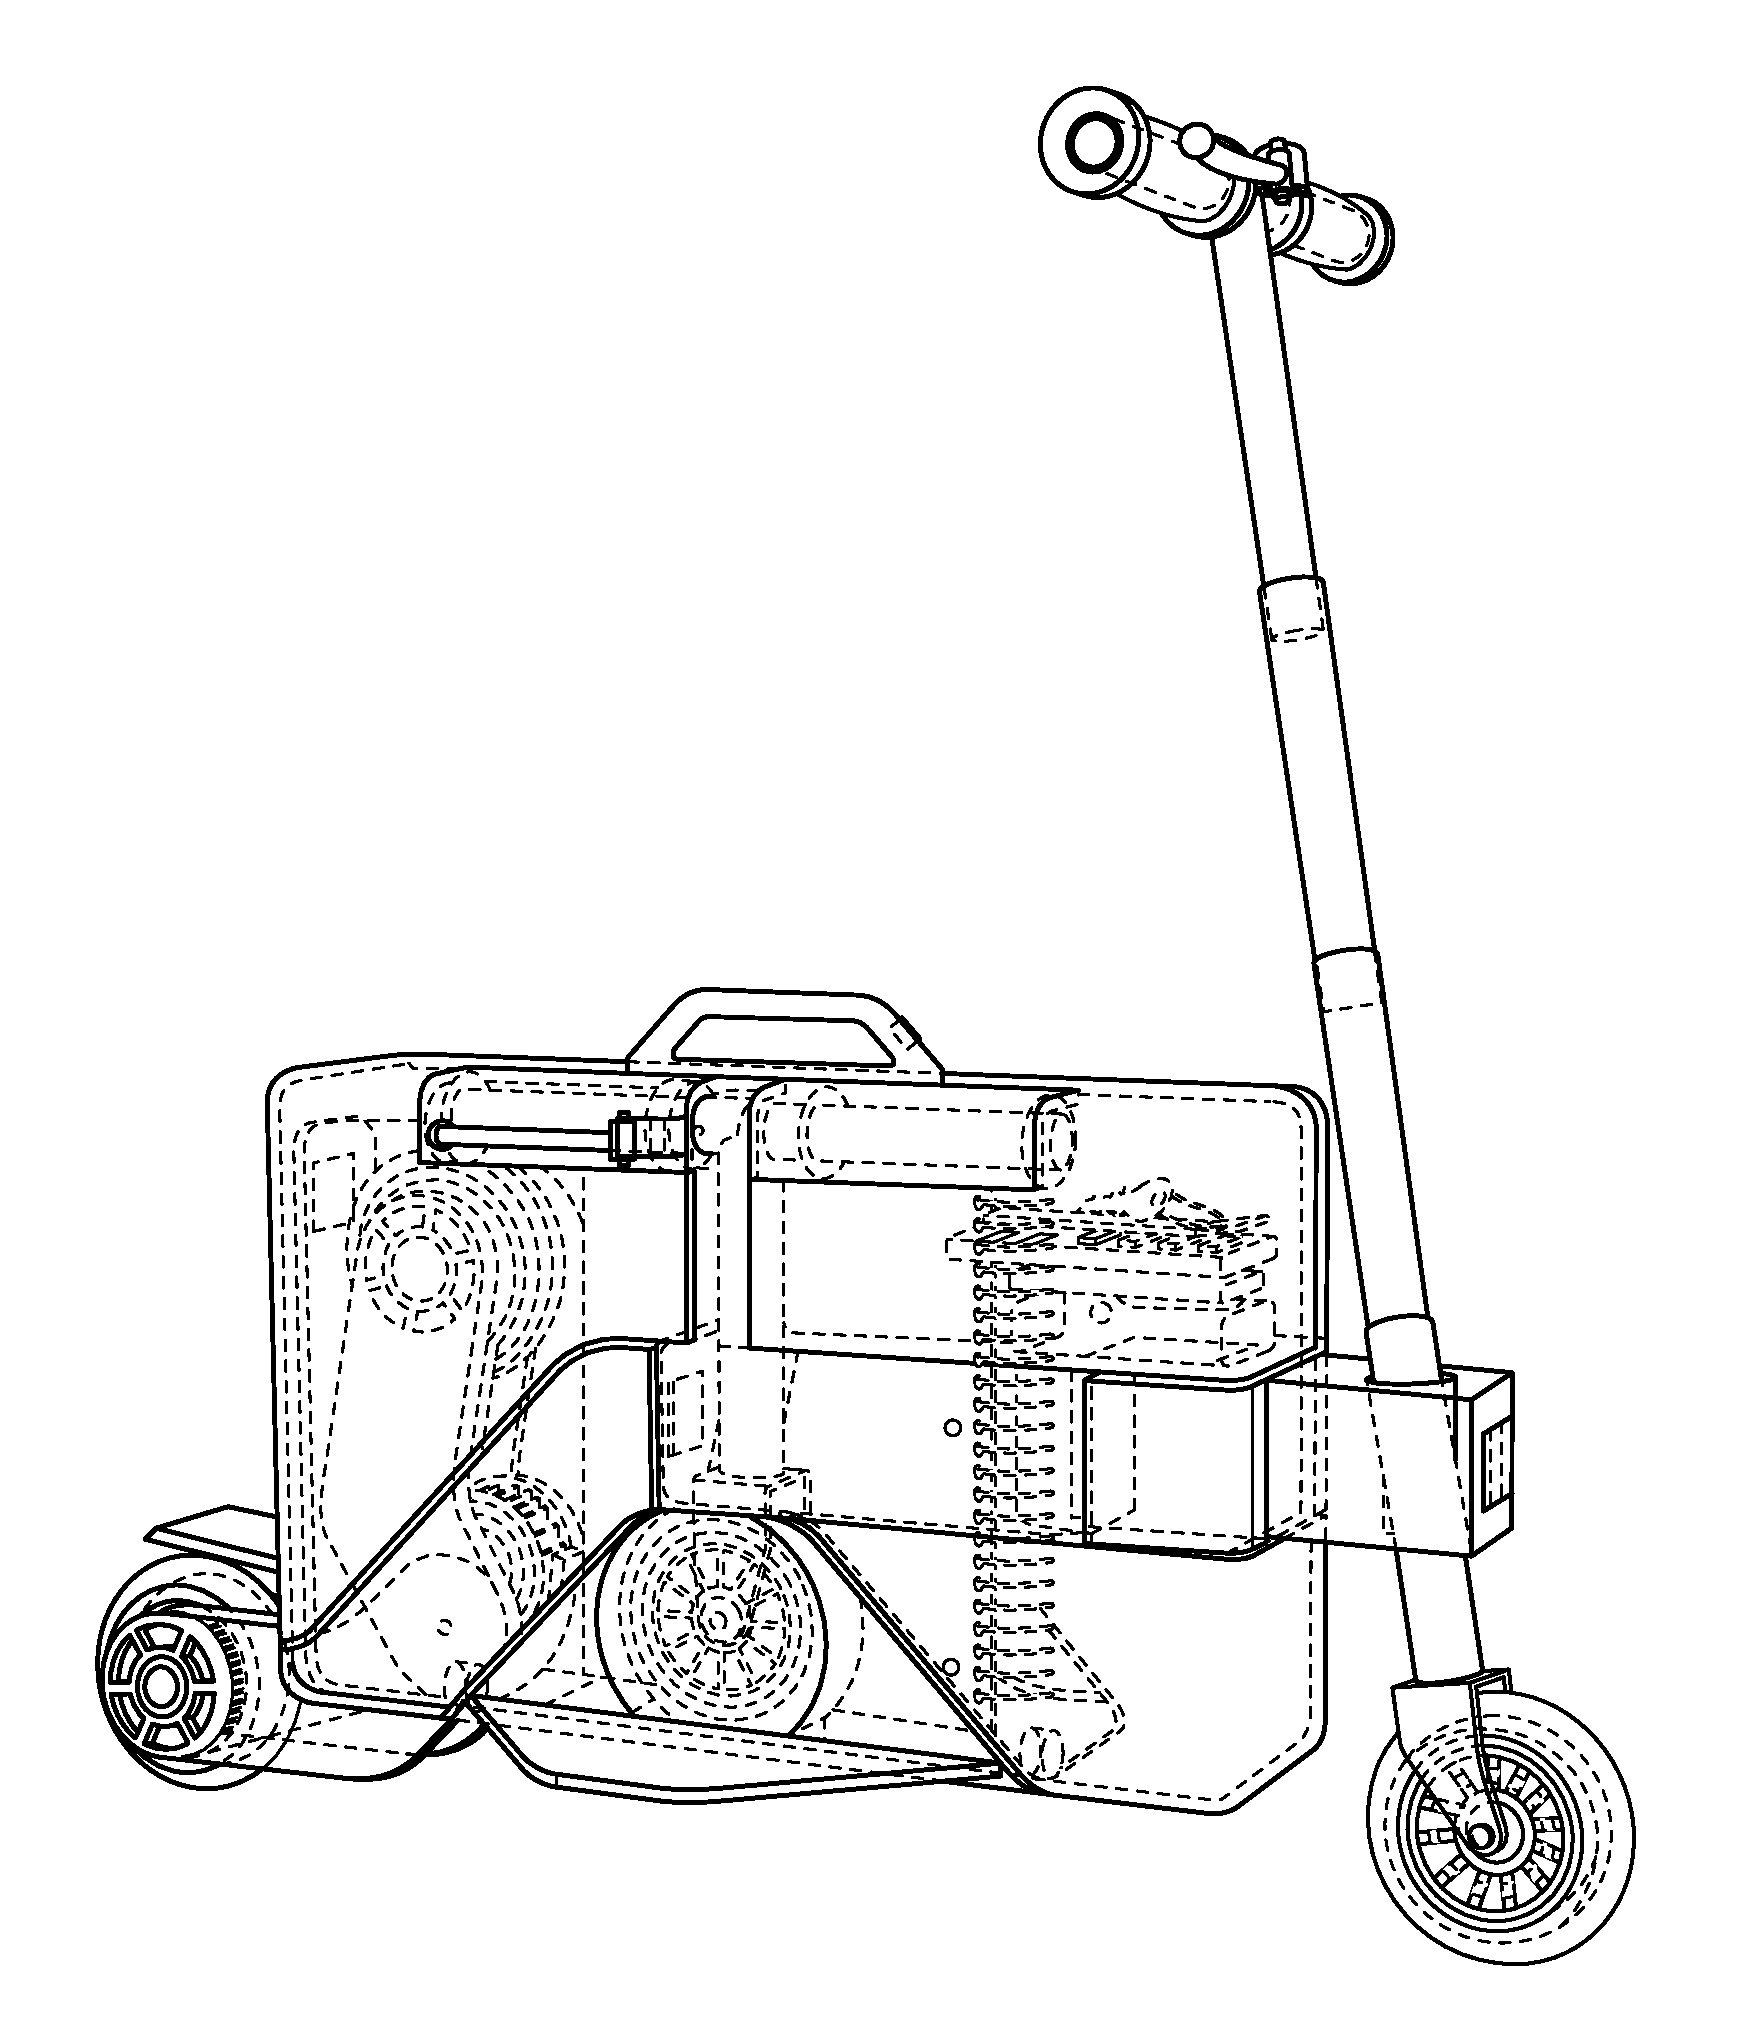 Multi-functional personal mobility device compacting to briefcase size